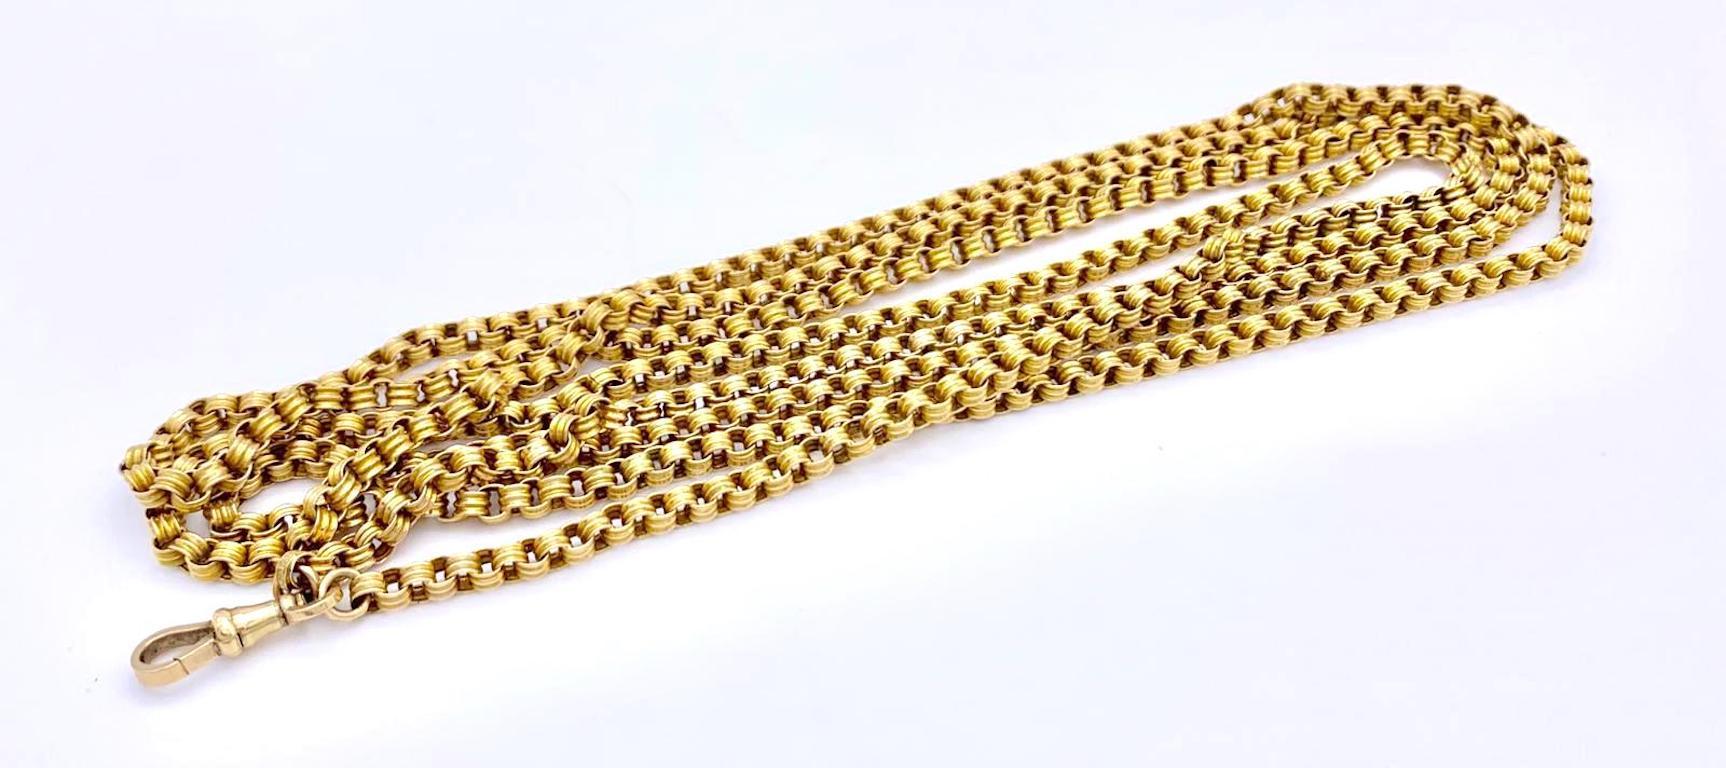 Beautiful strong 9 k longguard chain with swivel made out of  14 k gold. The chain can be worn long or three to four times round the neck.

The length of the chain (double) is 77,5cm.